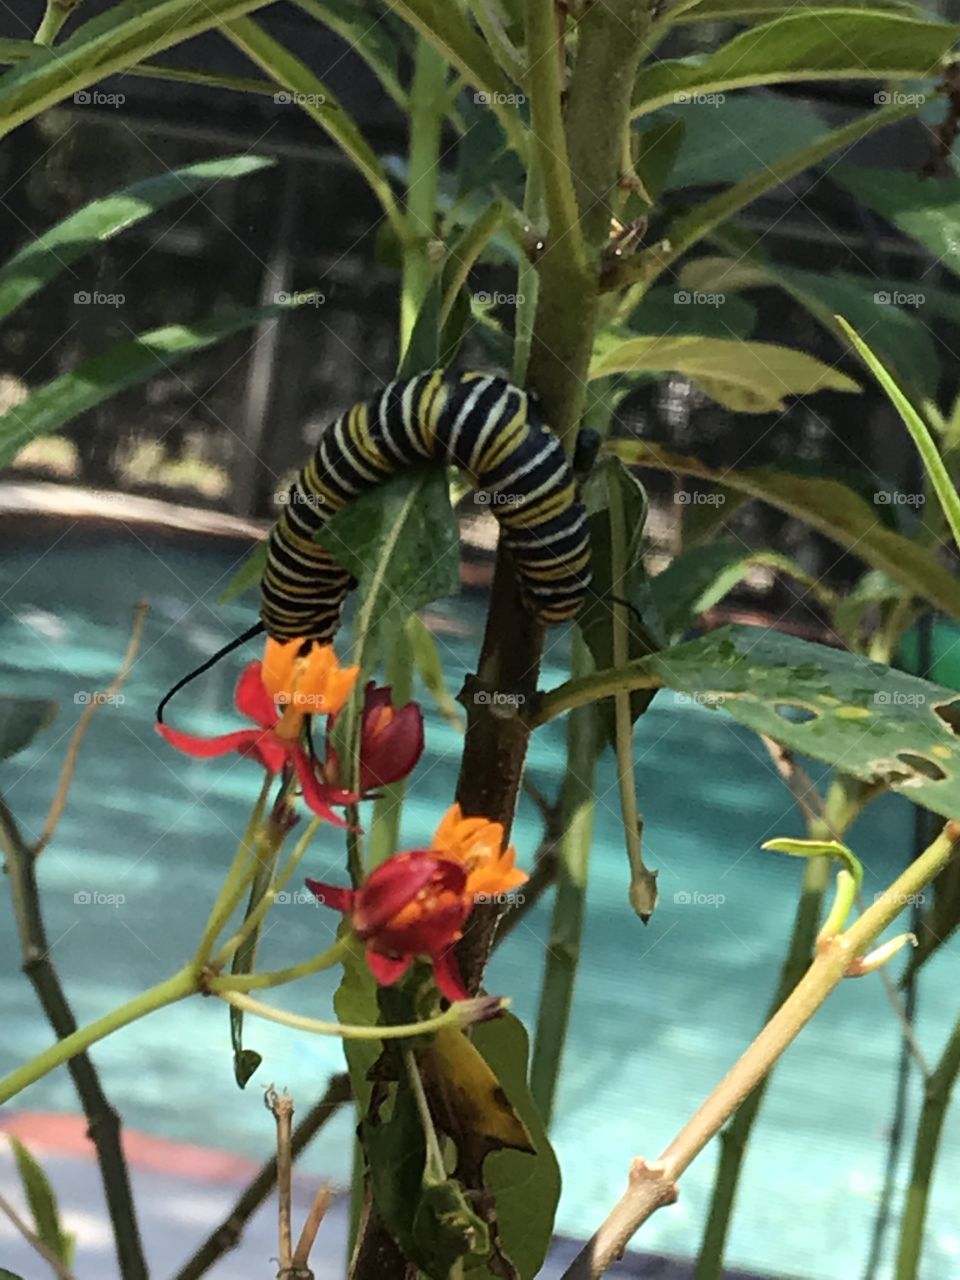 Monarch caterpillar eating milkweed flowers and leaves in preparation of its transformation into butterfly.